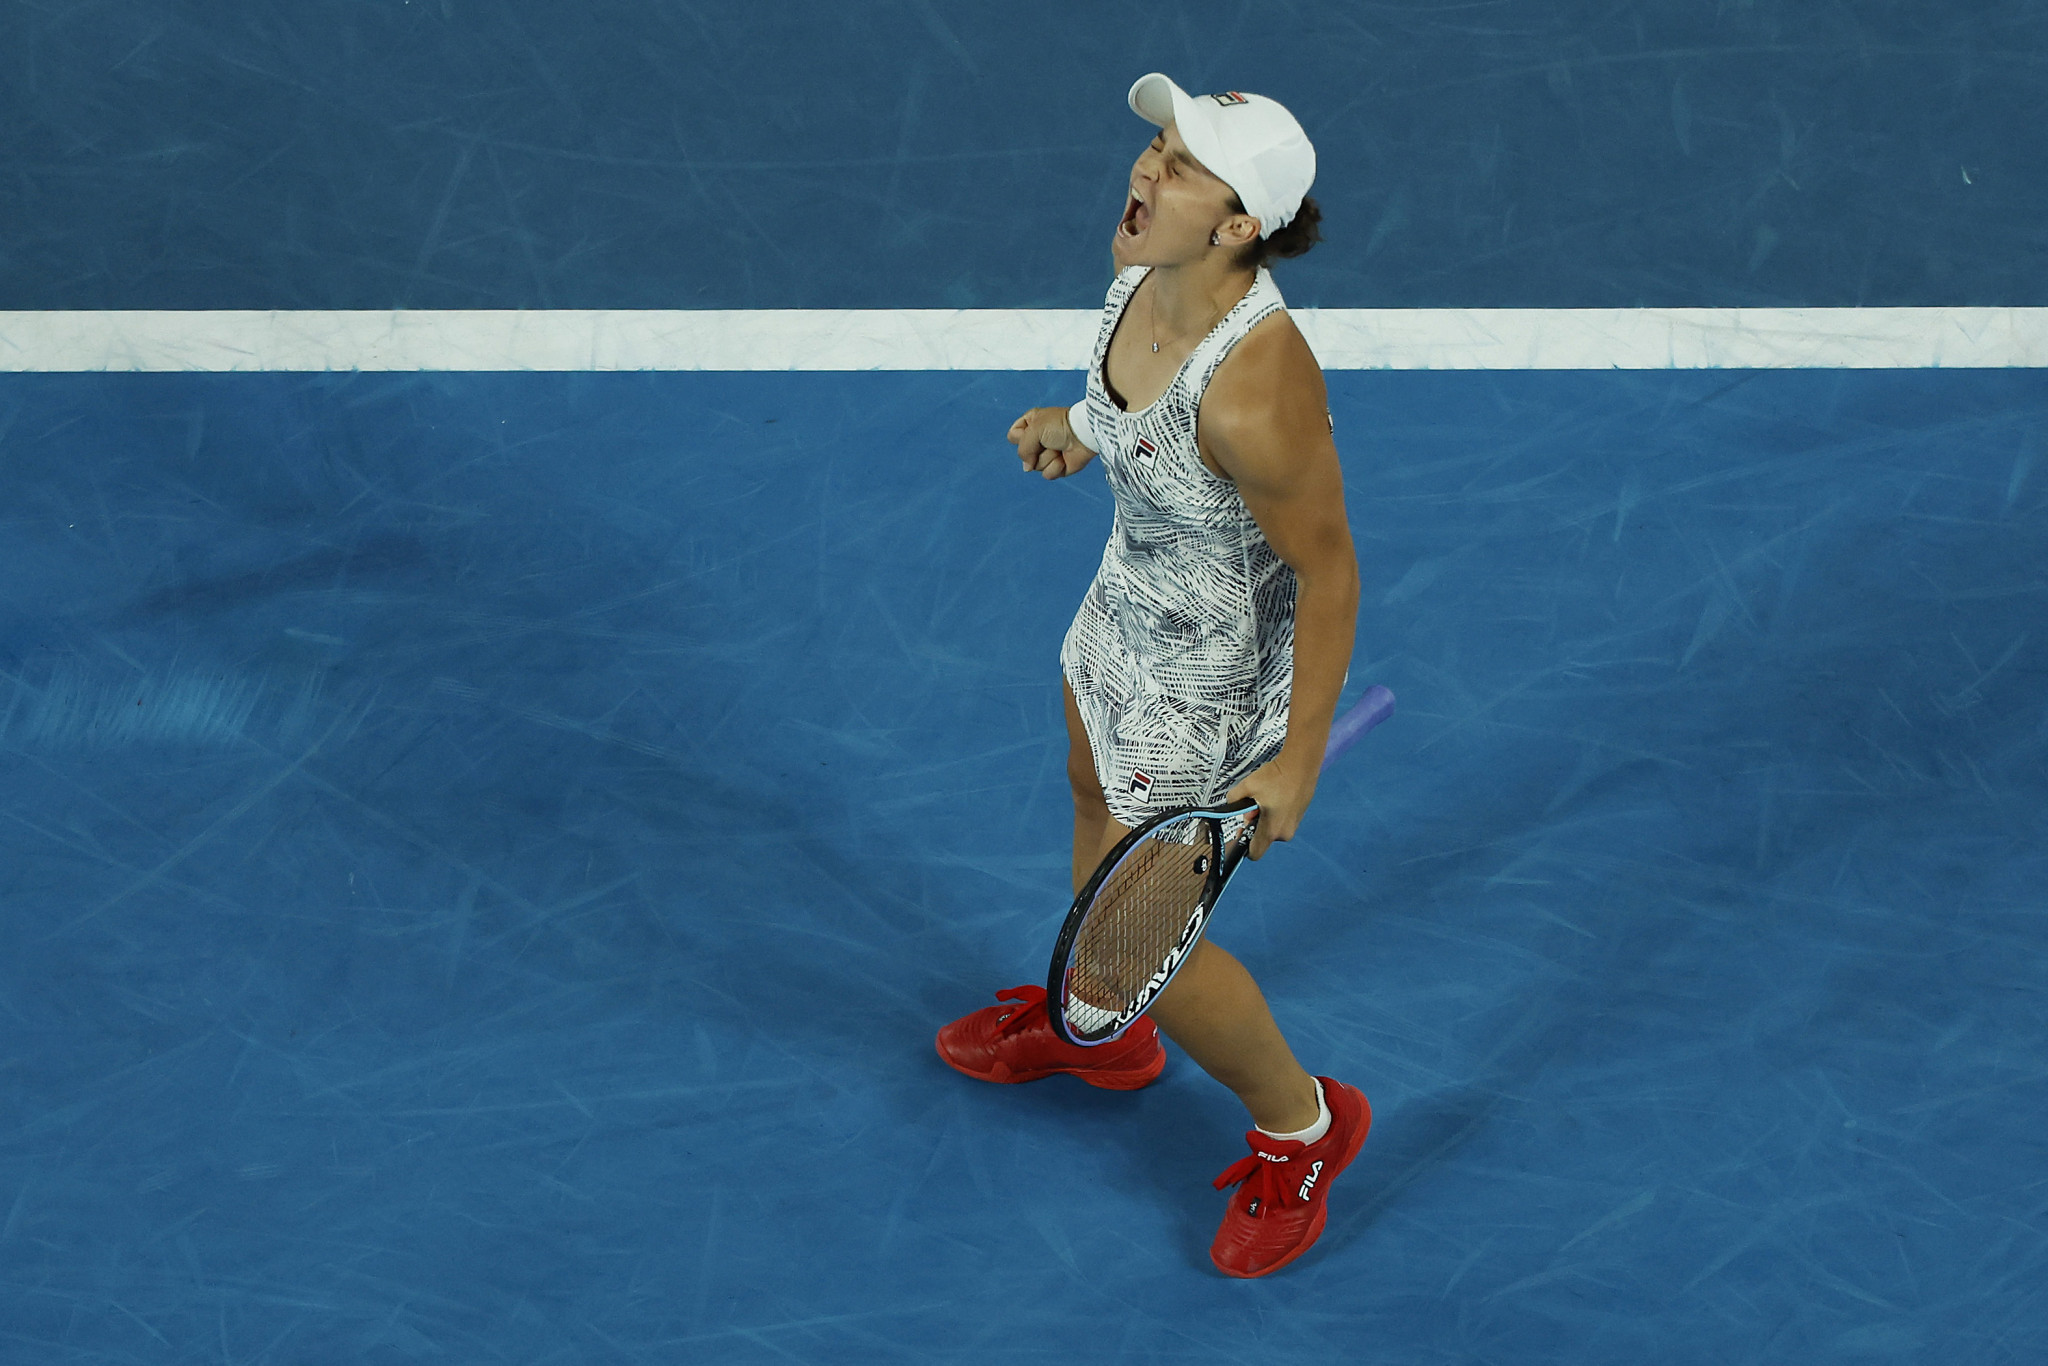 Ashleigh Barty roars in delight after winning the Australian Open women's singles title in Melbourne ©Getty Images